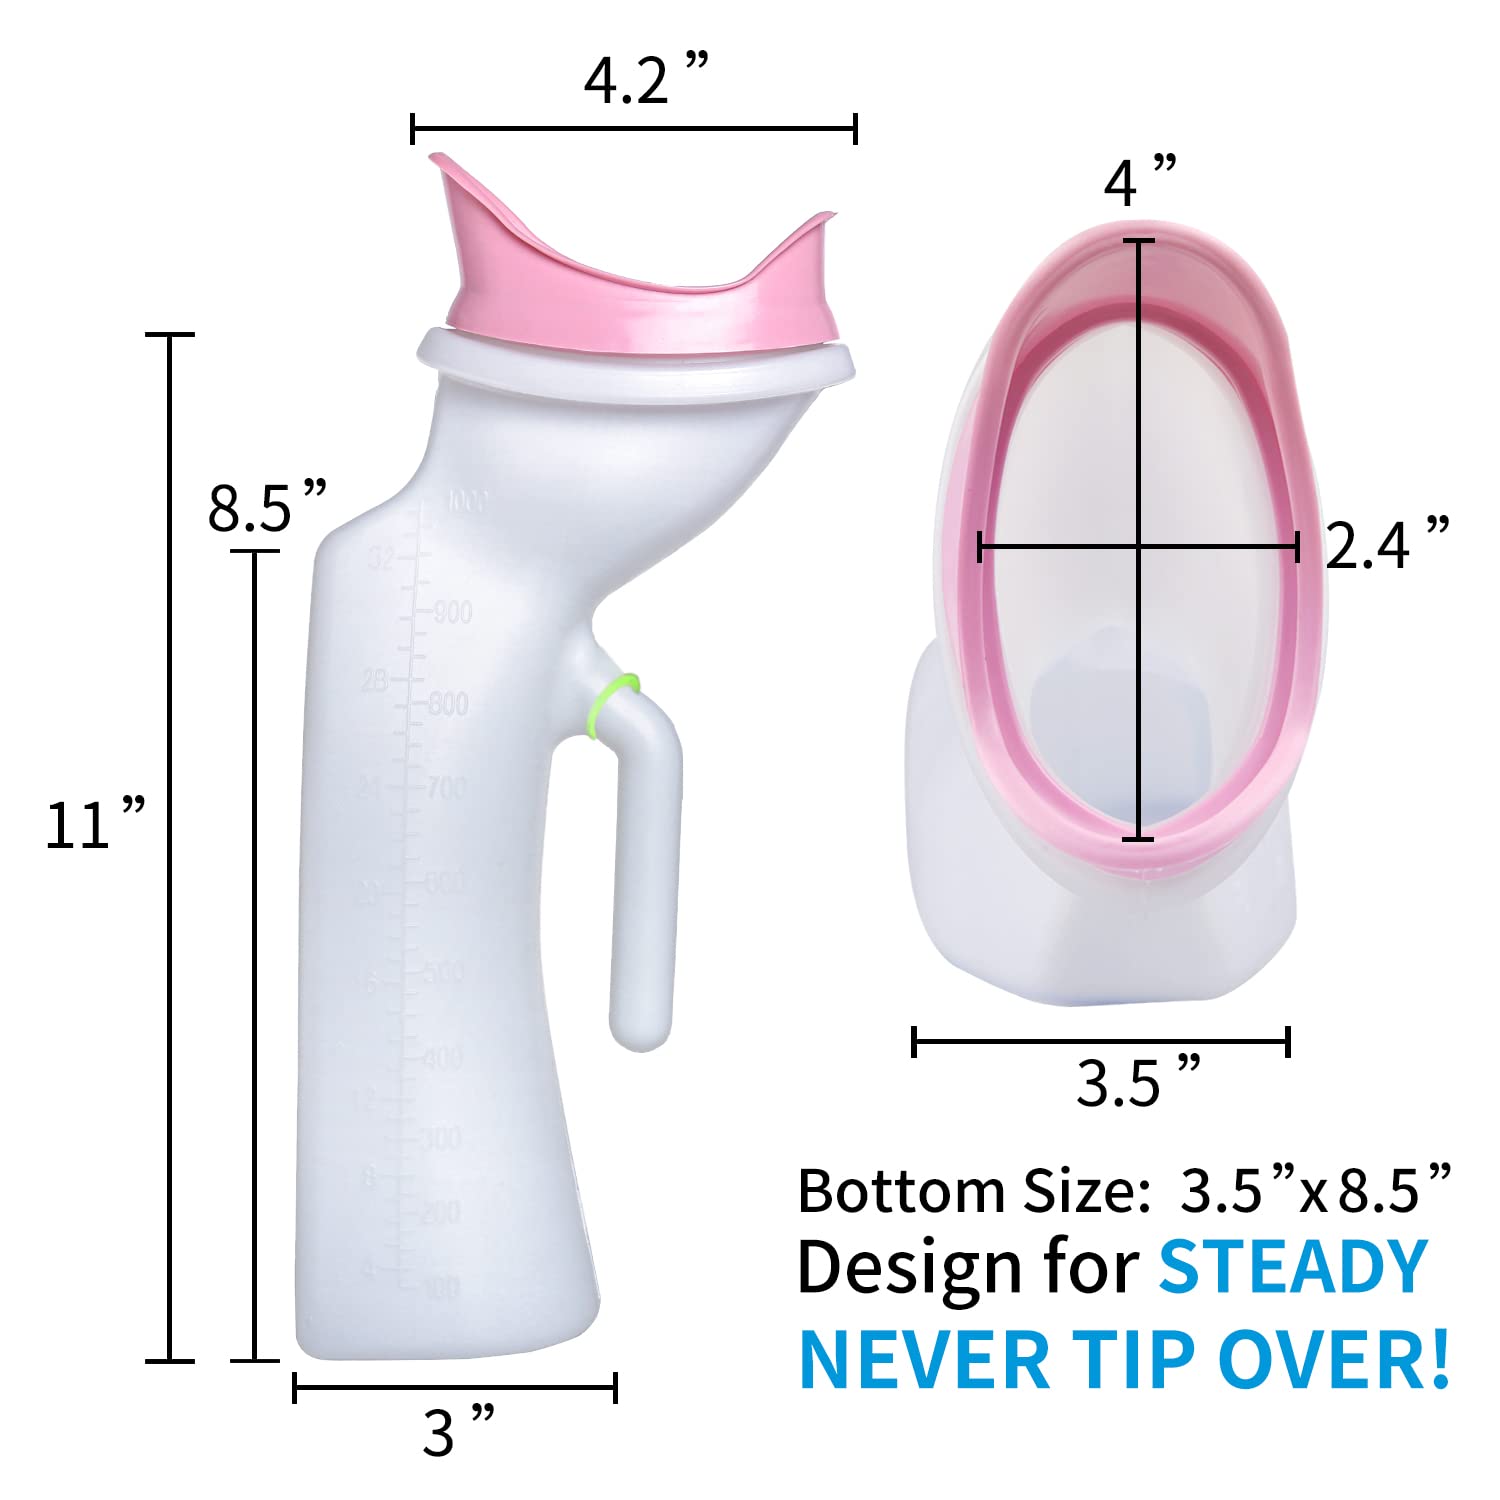 MINIVON Female Urinal for Women - 32oz/1000mL Pee Bottle Bedside, Glow in The Dark Urination Device for Elderly Bedridden Patients in Bed, Urinary Chamber Portable Urine Bottle for Travel